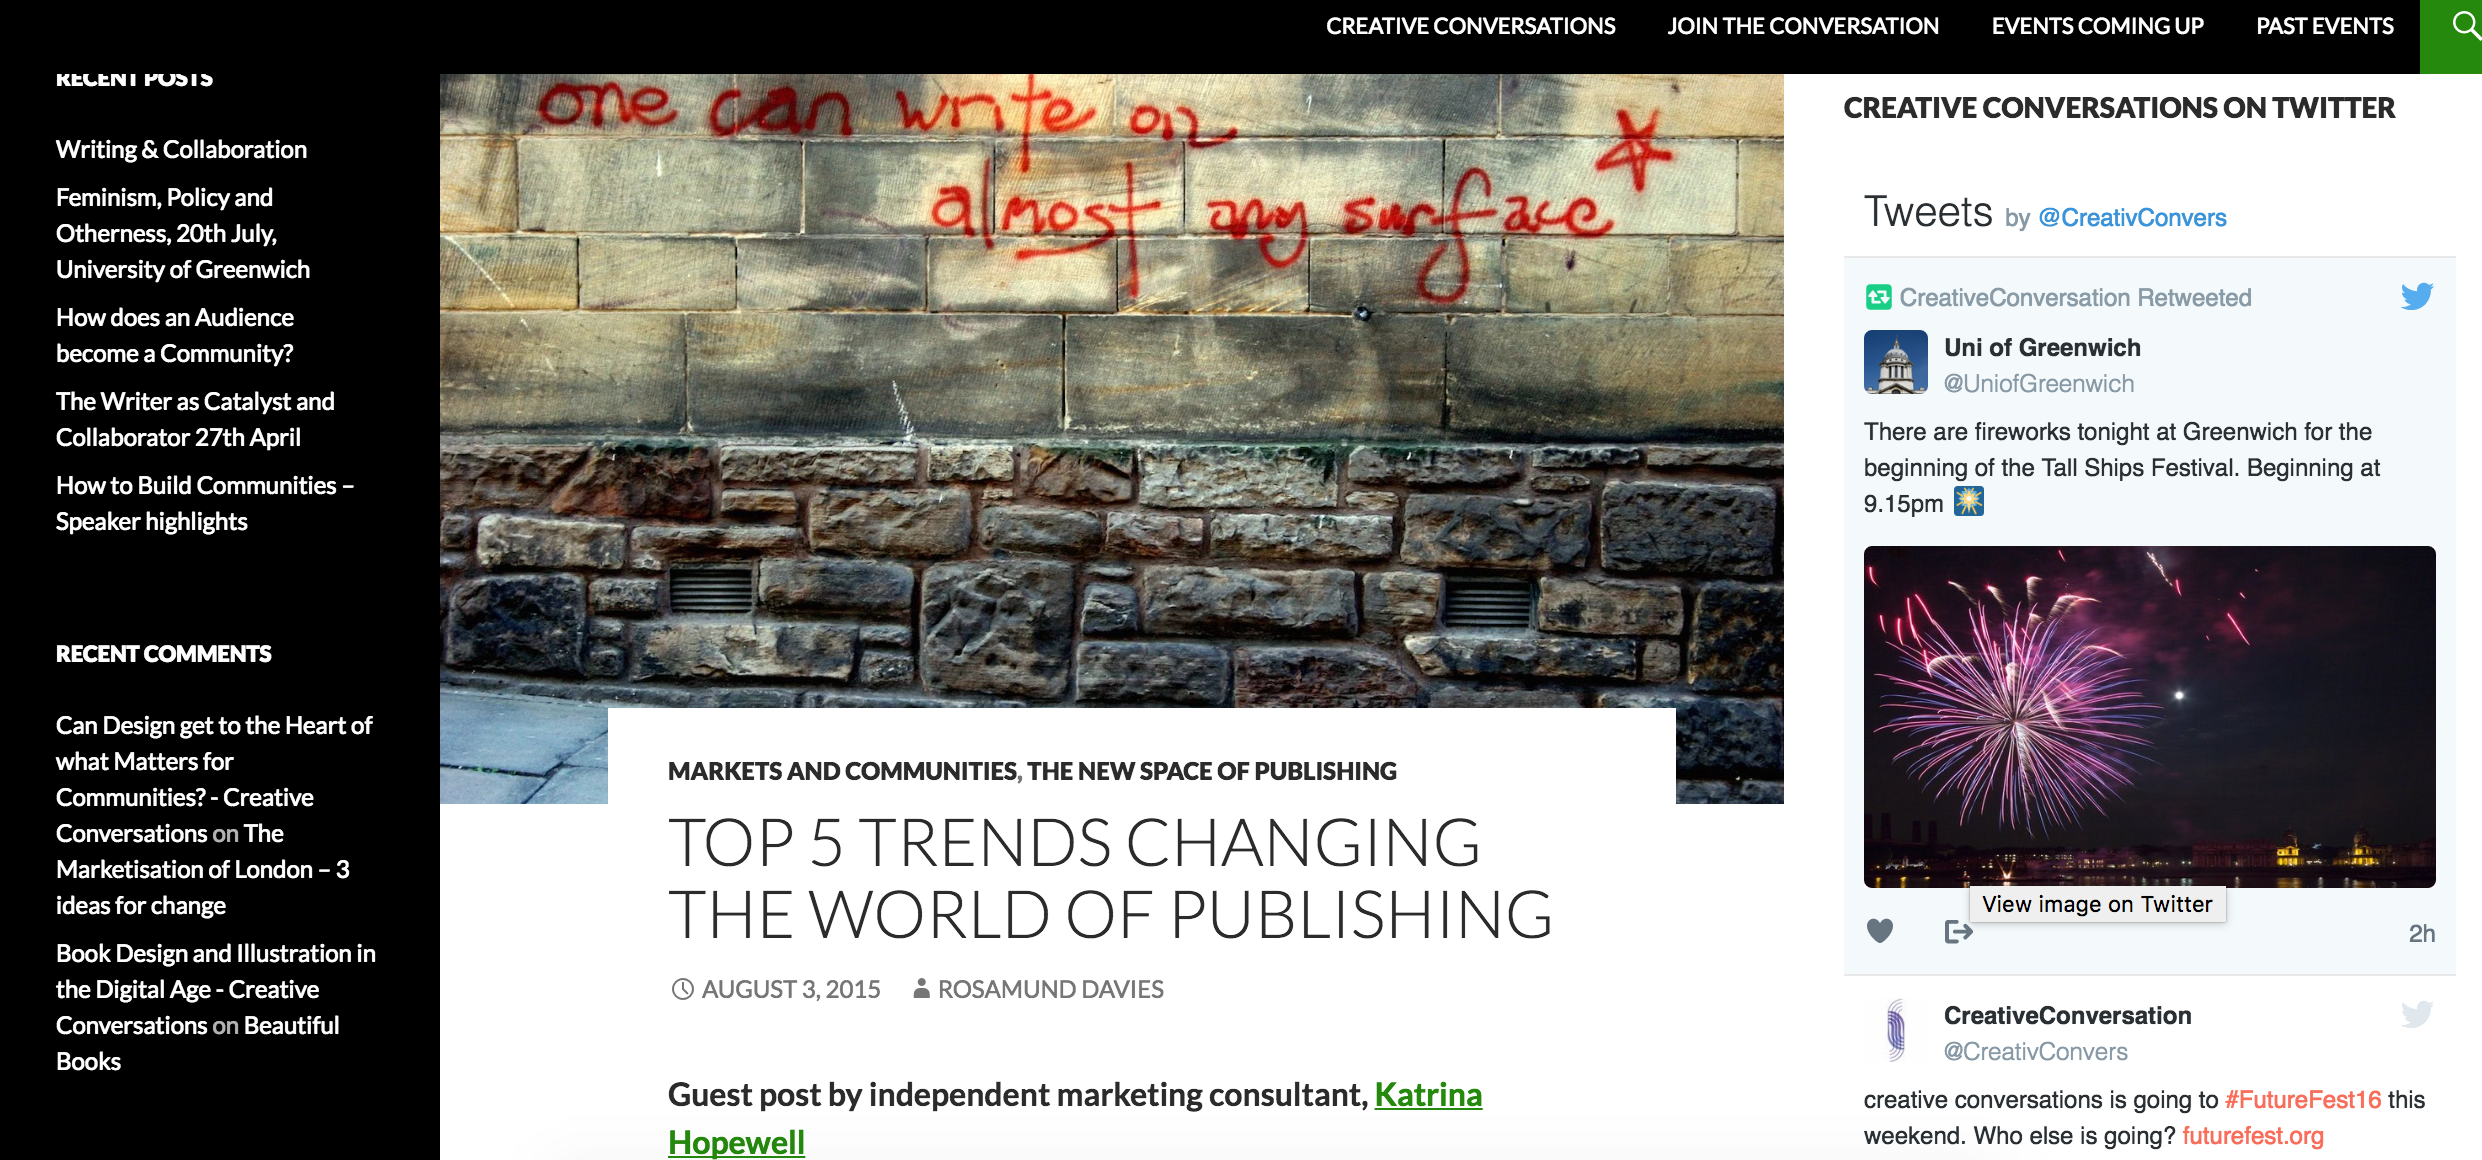 The five top trends changing the world of publishing